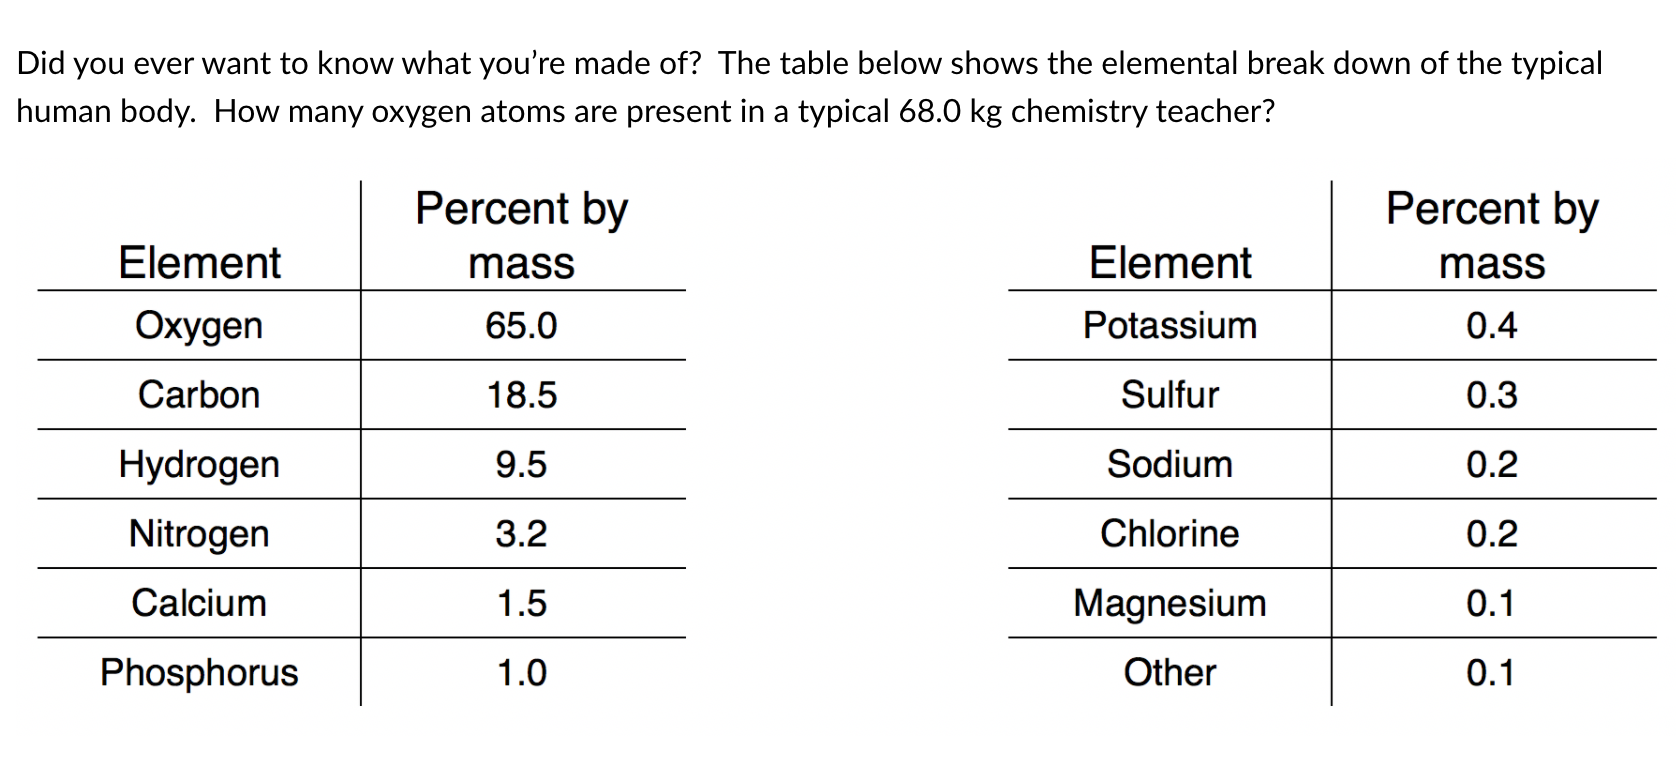 Did you ever want to know what you're made of? The table below shows the elemental break down of the typical
human body. How many oxygen atoms are present in a typical 68.0 kg chemistry teacher?
Percent by
Percent by
Element
mass
Element
mass
Охудen
65.0
Potassium
0.4
Carbon
18.5
Sulfur
0.3
Hydrogen
9.5
Sodium
0.2
Nitrogen
3.2
Chlorine
0.2
Calcium
1.5
Magnesium
0.1
Phosphorus
1.0
Other
0.1
